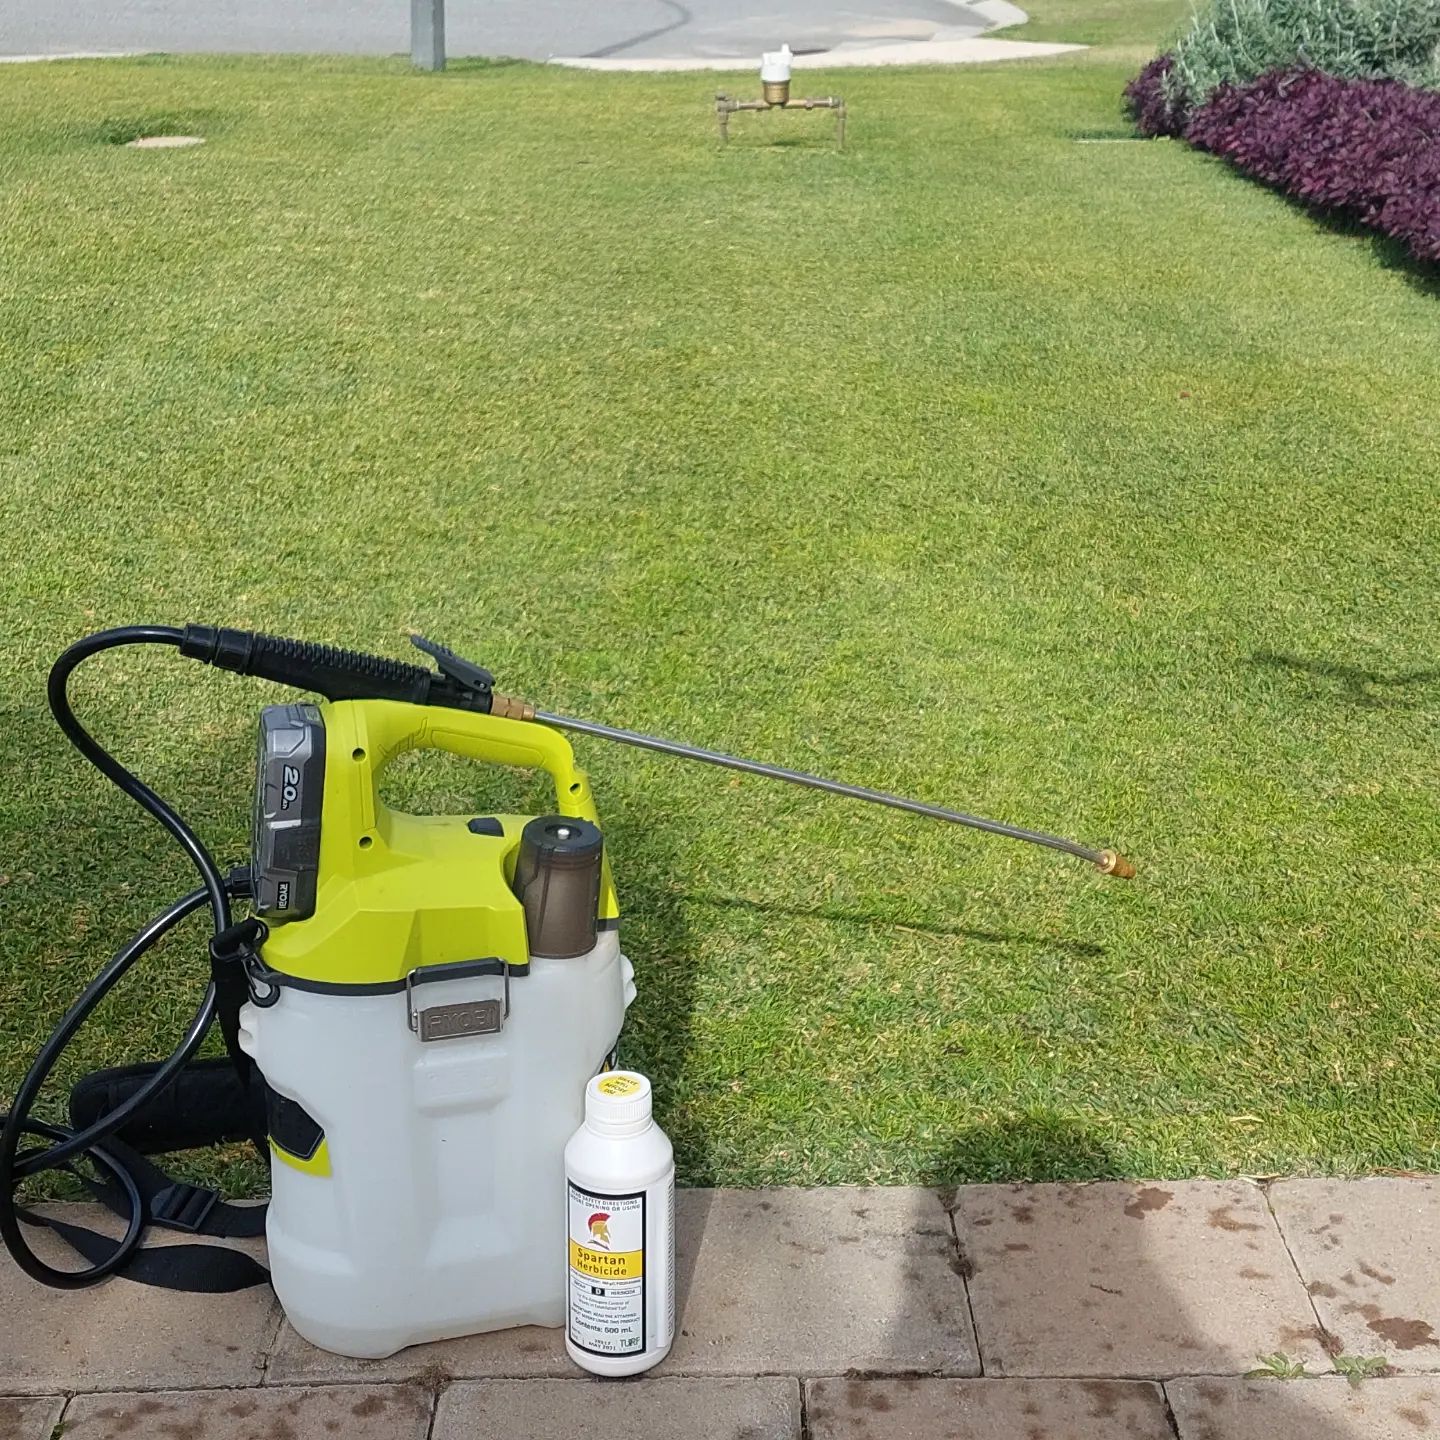 Herbicide Spray 🌱

I have just applied an application of Spartan Herbicide across my lawn with my ryobiau battery pack sprayer, which makes life easy when spraying products across large areas, this pre emergent spray works wonders and is a must do at winter time to keep those weeds away. 

Admittedly a little late on my application, a couple of weeks ago would have been better, however it's done now and will prevent any future weeds from germinating in the lawn and garden this winter, I have been using Spartan for a couple of seasons now and have had great results, remember that Spartan is a pre-emergent and won't kill any weeds that are present, however it does a great job of preventing them from popping up. 

#ryobi #ryobimade #ryobiau #spartan #herbicide #preemergent #gardentips #weedspraying #gardenaddict #gardenhacks #baileysgrowgardens #baileysturfect #lawnmaintenance #lawnfanatics #walawnaddicts #walawnlegends #lawnporn #lawnrules #lawndoctor #lawnprideau #lawntips #perthlawnmaintenaince #perthlawns #perthbackyards #perthlandscaping #bunnings #bunningswarehouse #betterhomesandgardens #bestlawn #lawnandgarden